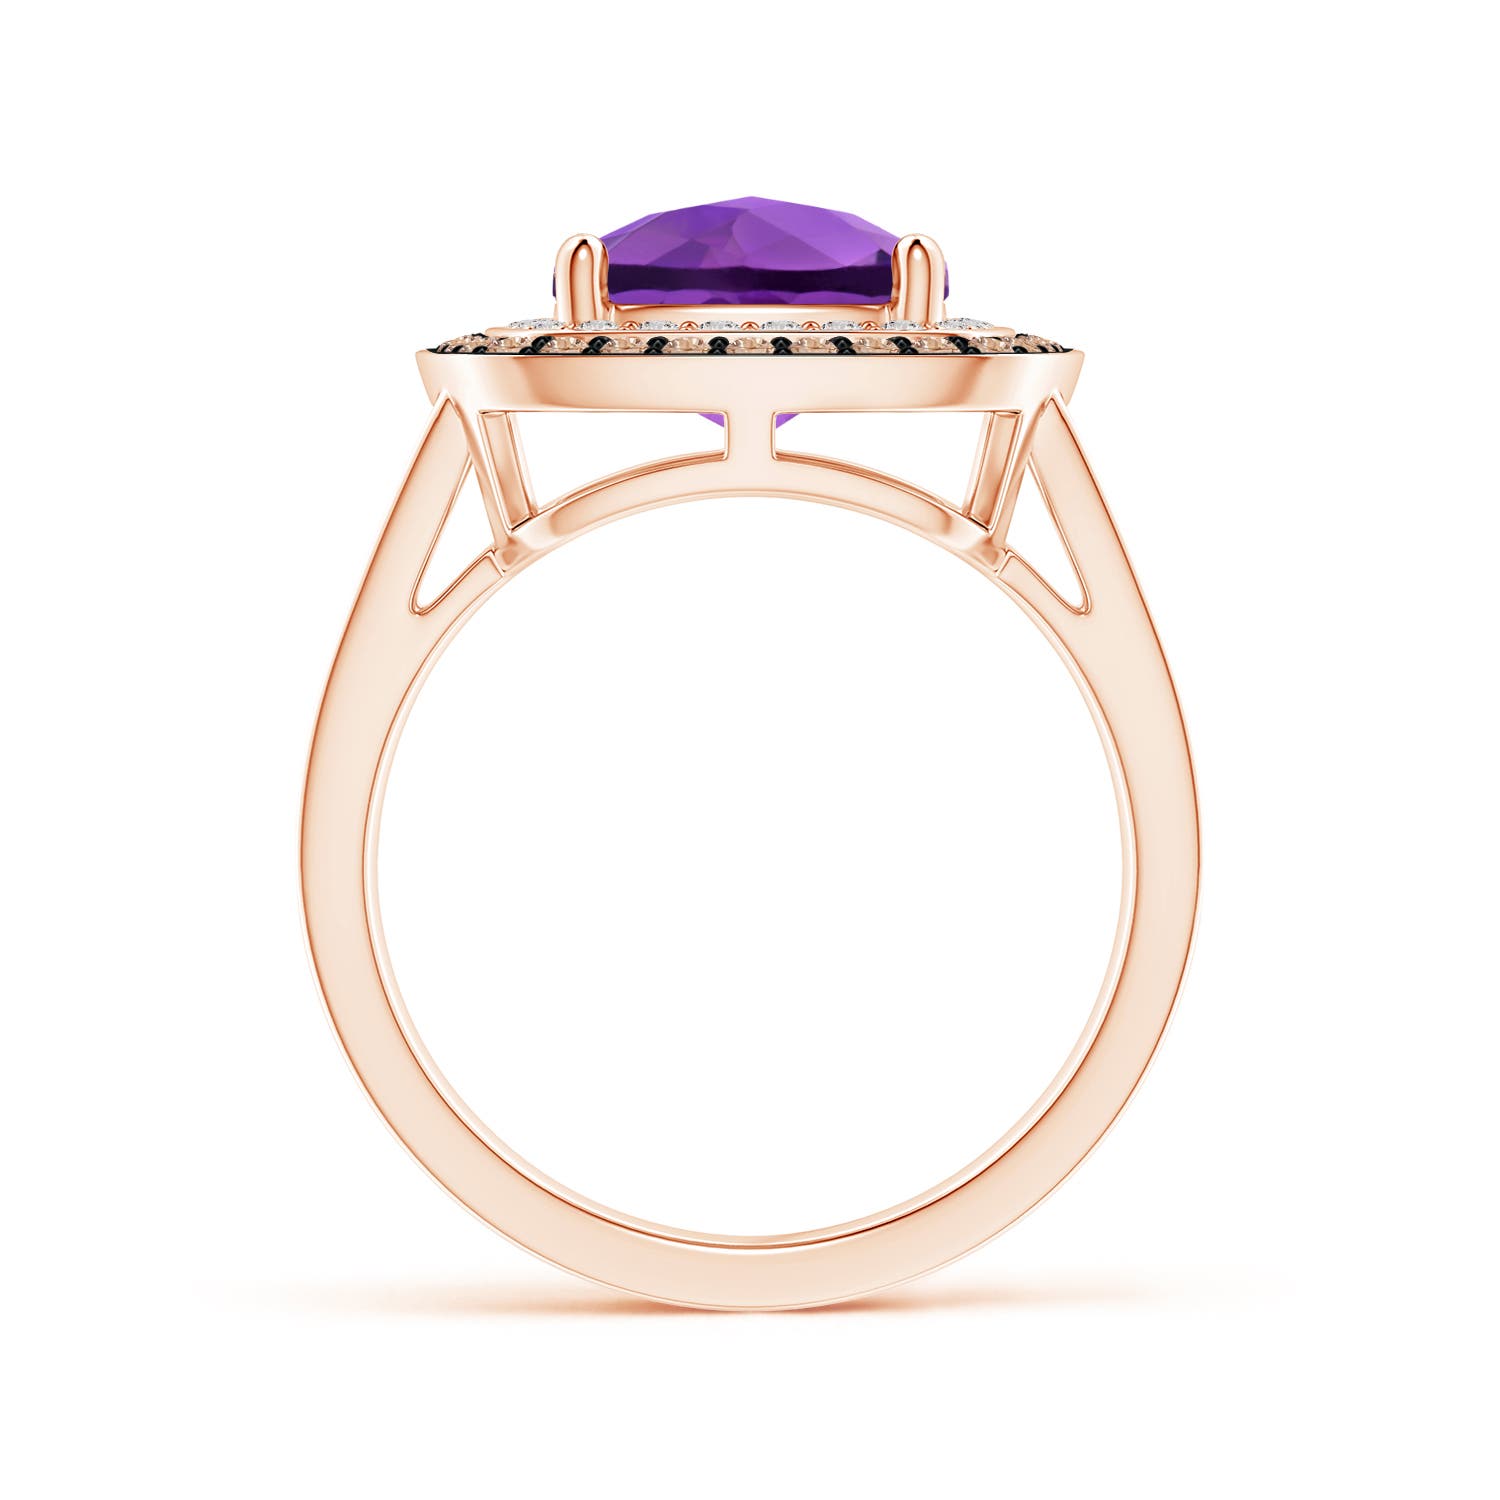 AA - Amethyst / 3.7 CT / 14 KT Rose Gold